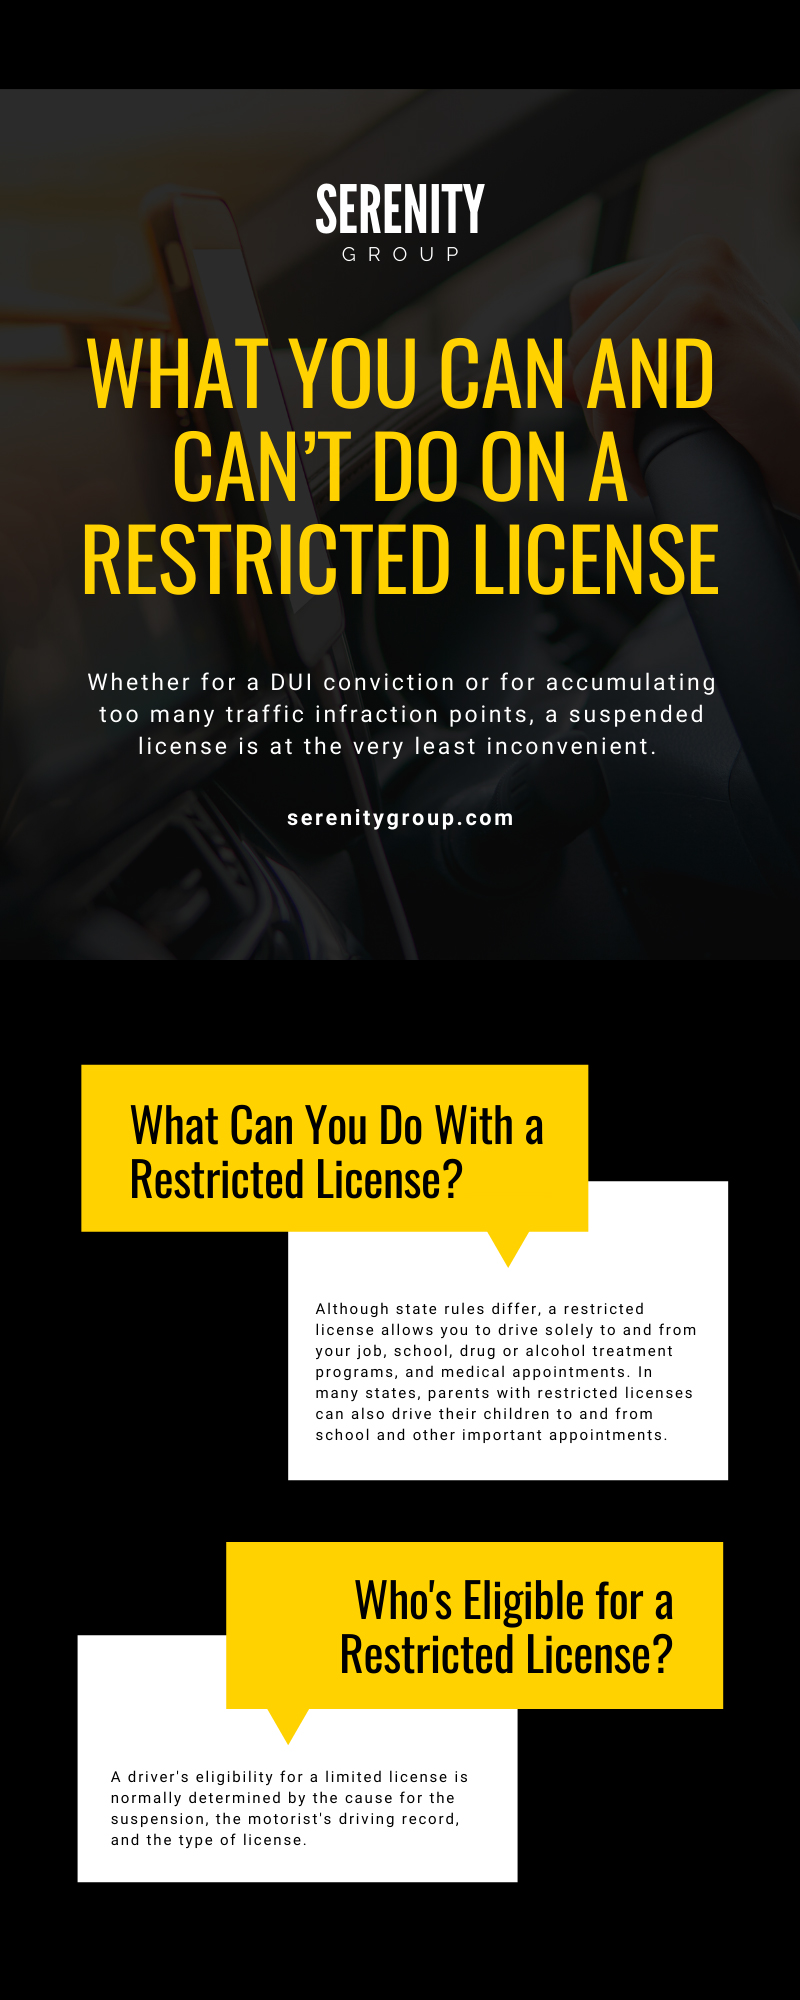 What You Can And Can’t Do on a Restricted License